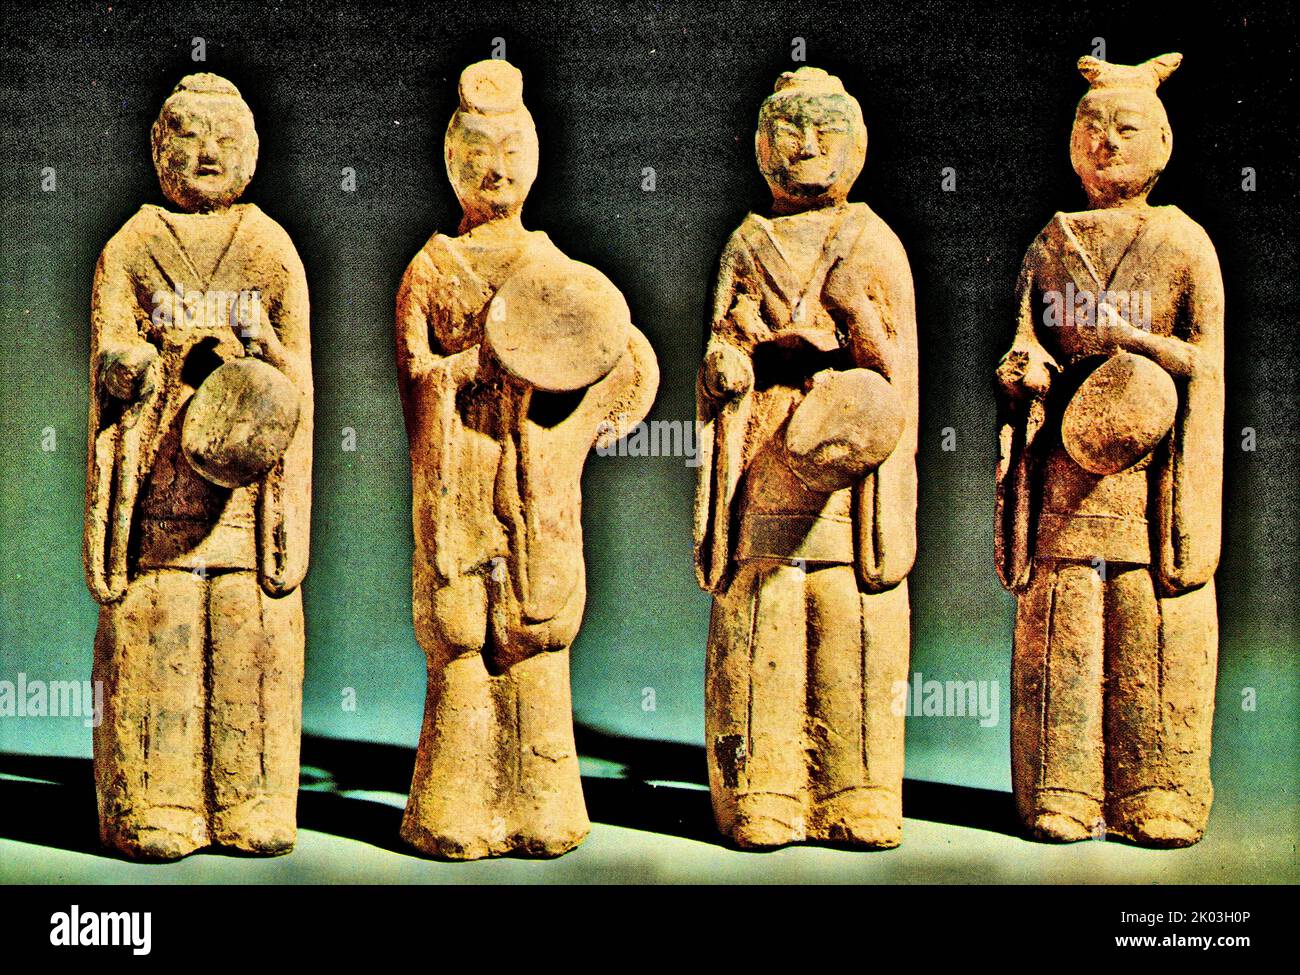 Northern Wei Dynasty figurines with dark soil, painted with white powder, wearing open-sleeved shorts with open collars reaching the chest, and wearing tight-fitting trousers with the toes slightly exposed. The first, third, and fourth figurines from the left each hold small drums. They all hold the handle of the drum in their left hand, and do not hold a stick in their right hand. The instrument held by the second figurine is a long-waisted drum. From the left, the first, second and third figurines wear headscarves, and the fourth figurines have their hair and heads tied together, and the hai Stock Photo